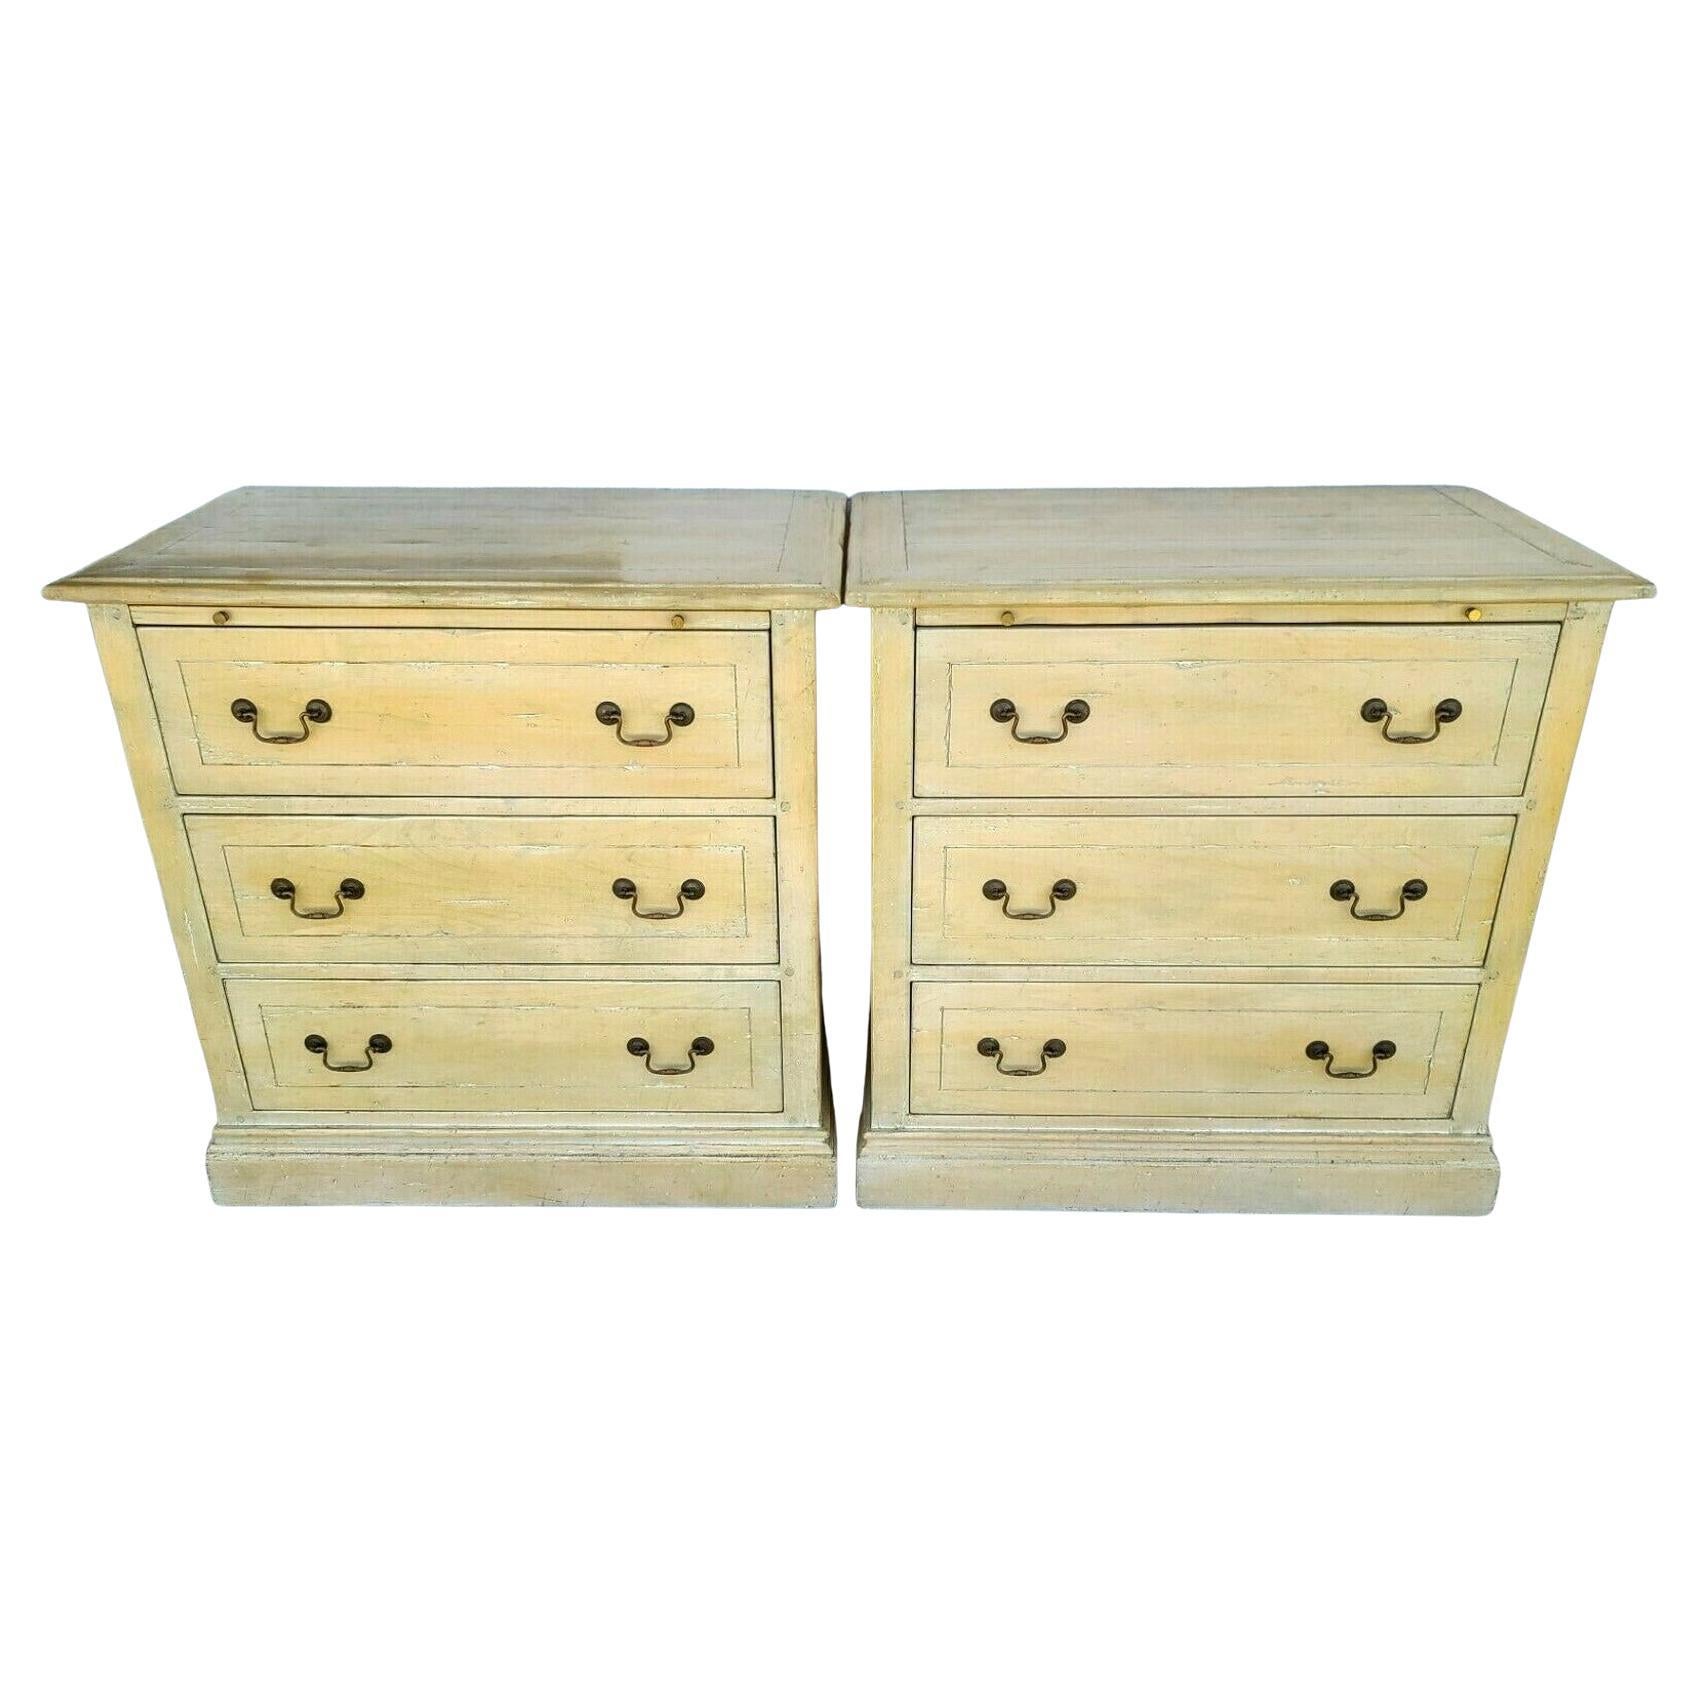 Melrose Collection Distressed Solid Wood Nightstands by Guy Chaddock